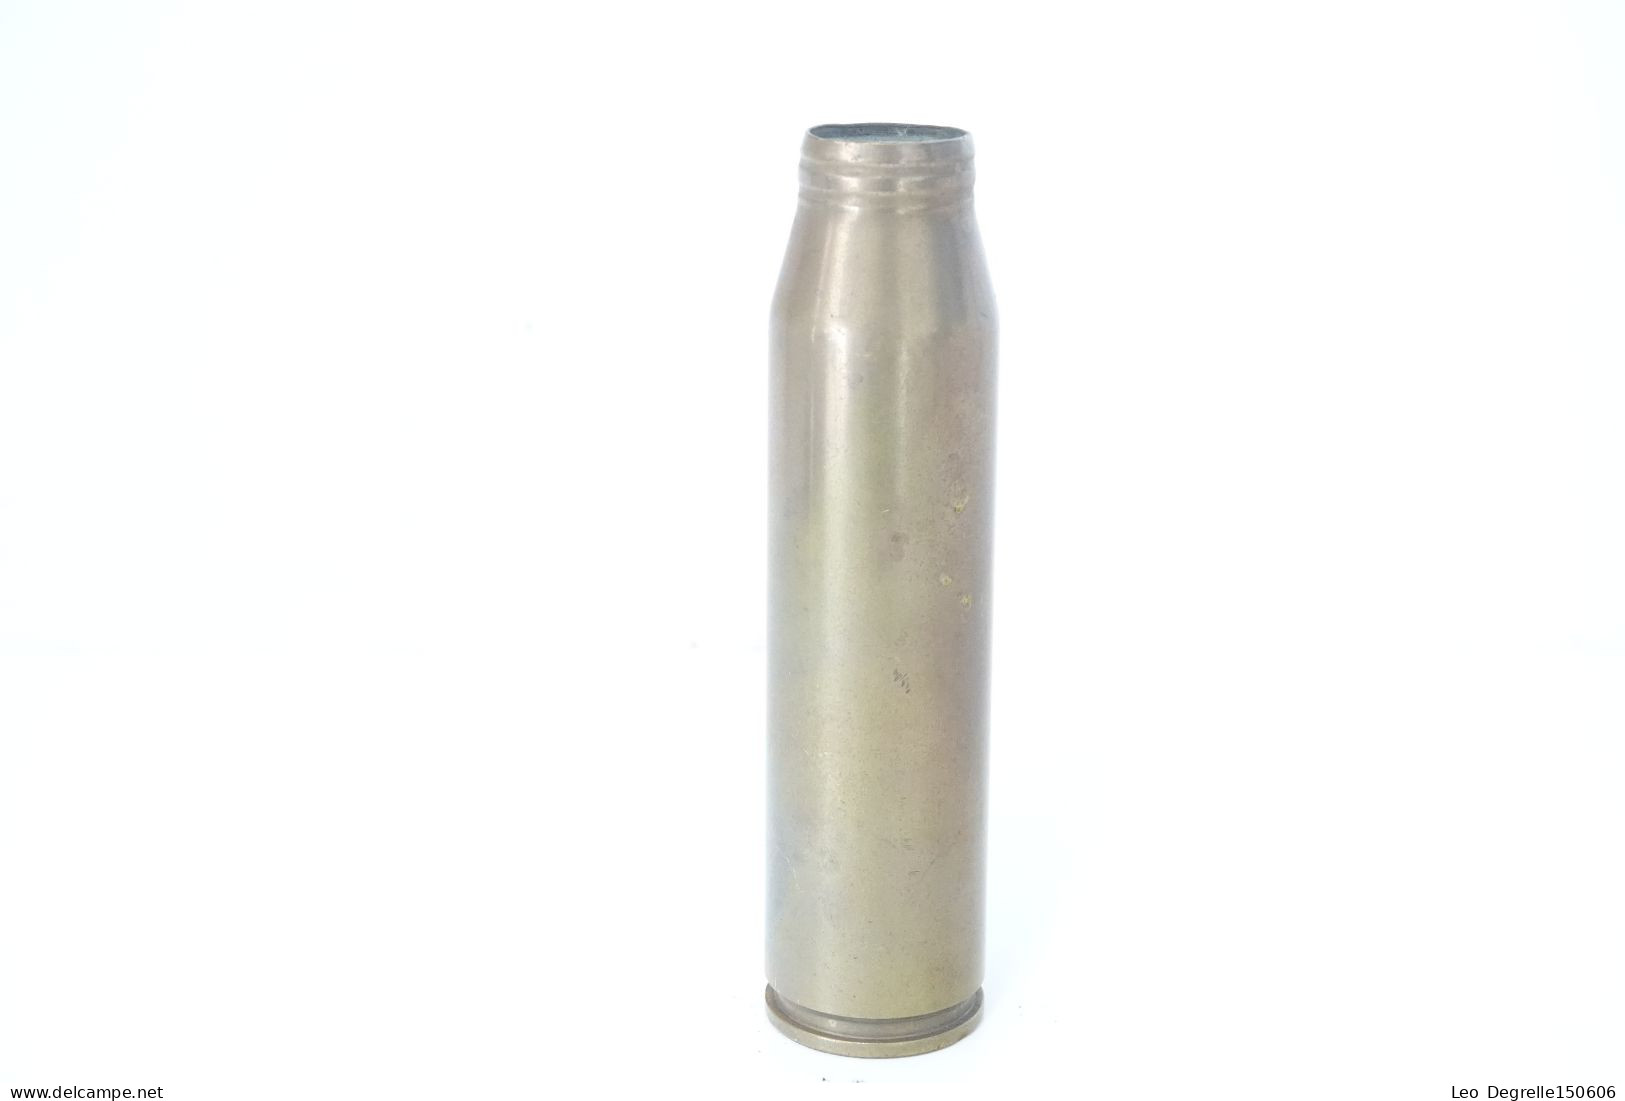 Militaria - Ammunition : Original French 30mm Rarden Round 831A - WW2 1973 - Weapon Ammo Deactivated Shell - L = 17 - Decorative Weapons